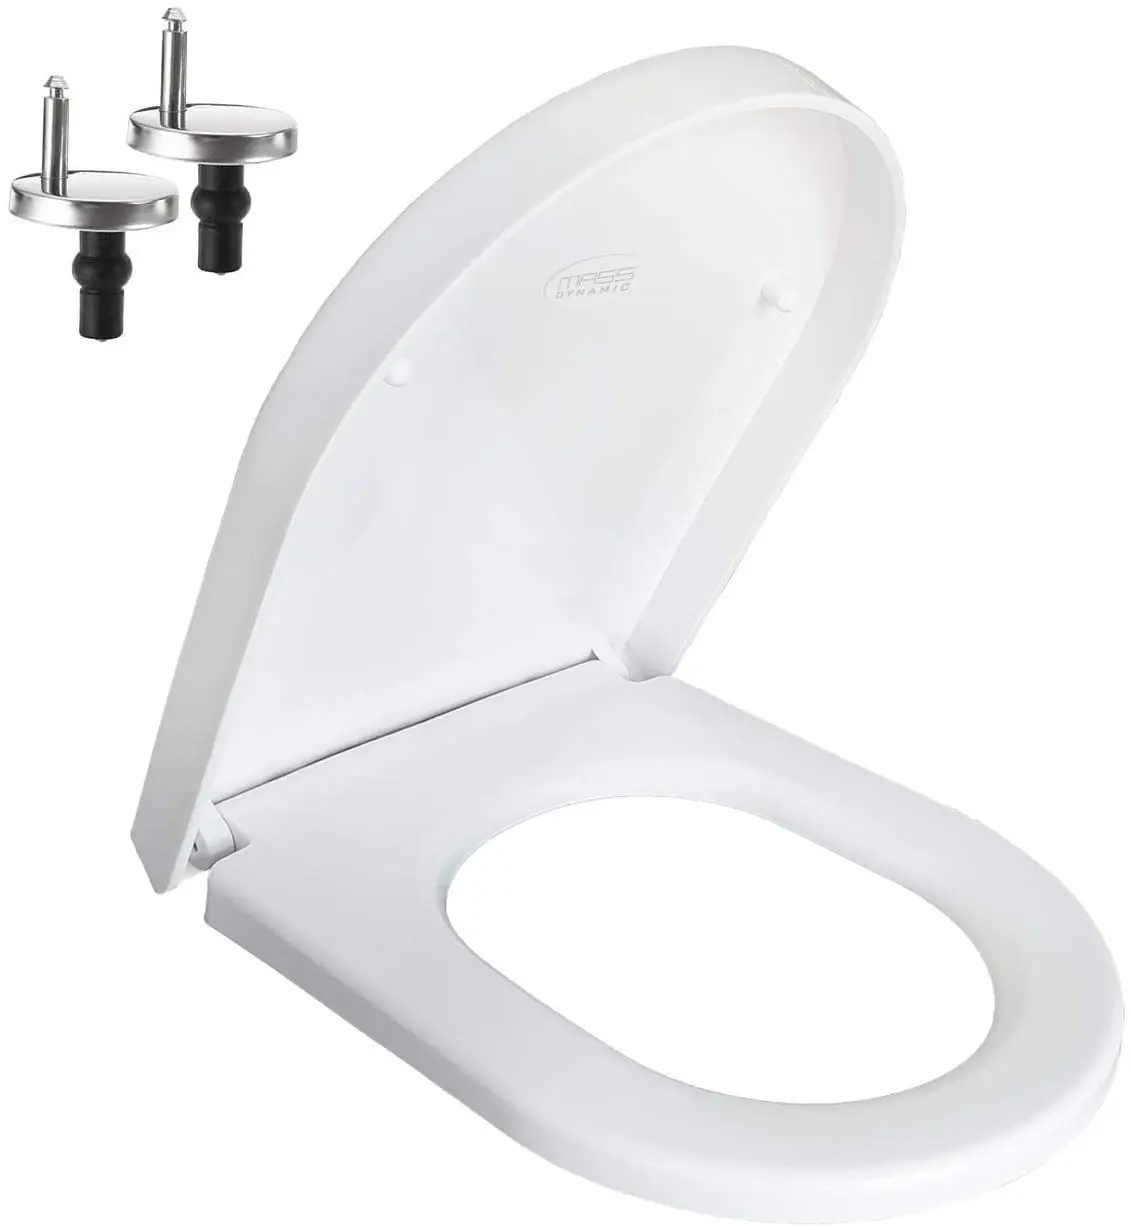 Luxury White D Shape Toilet Seat Stainless Steel Hinges 